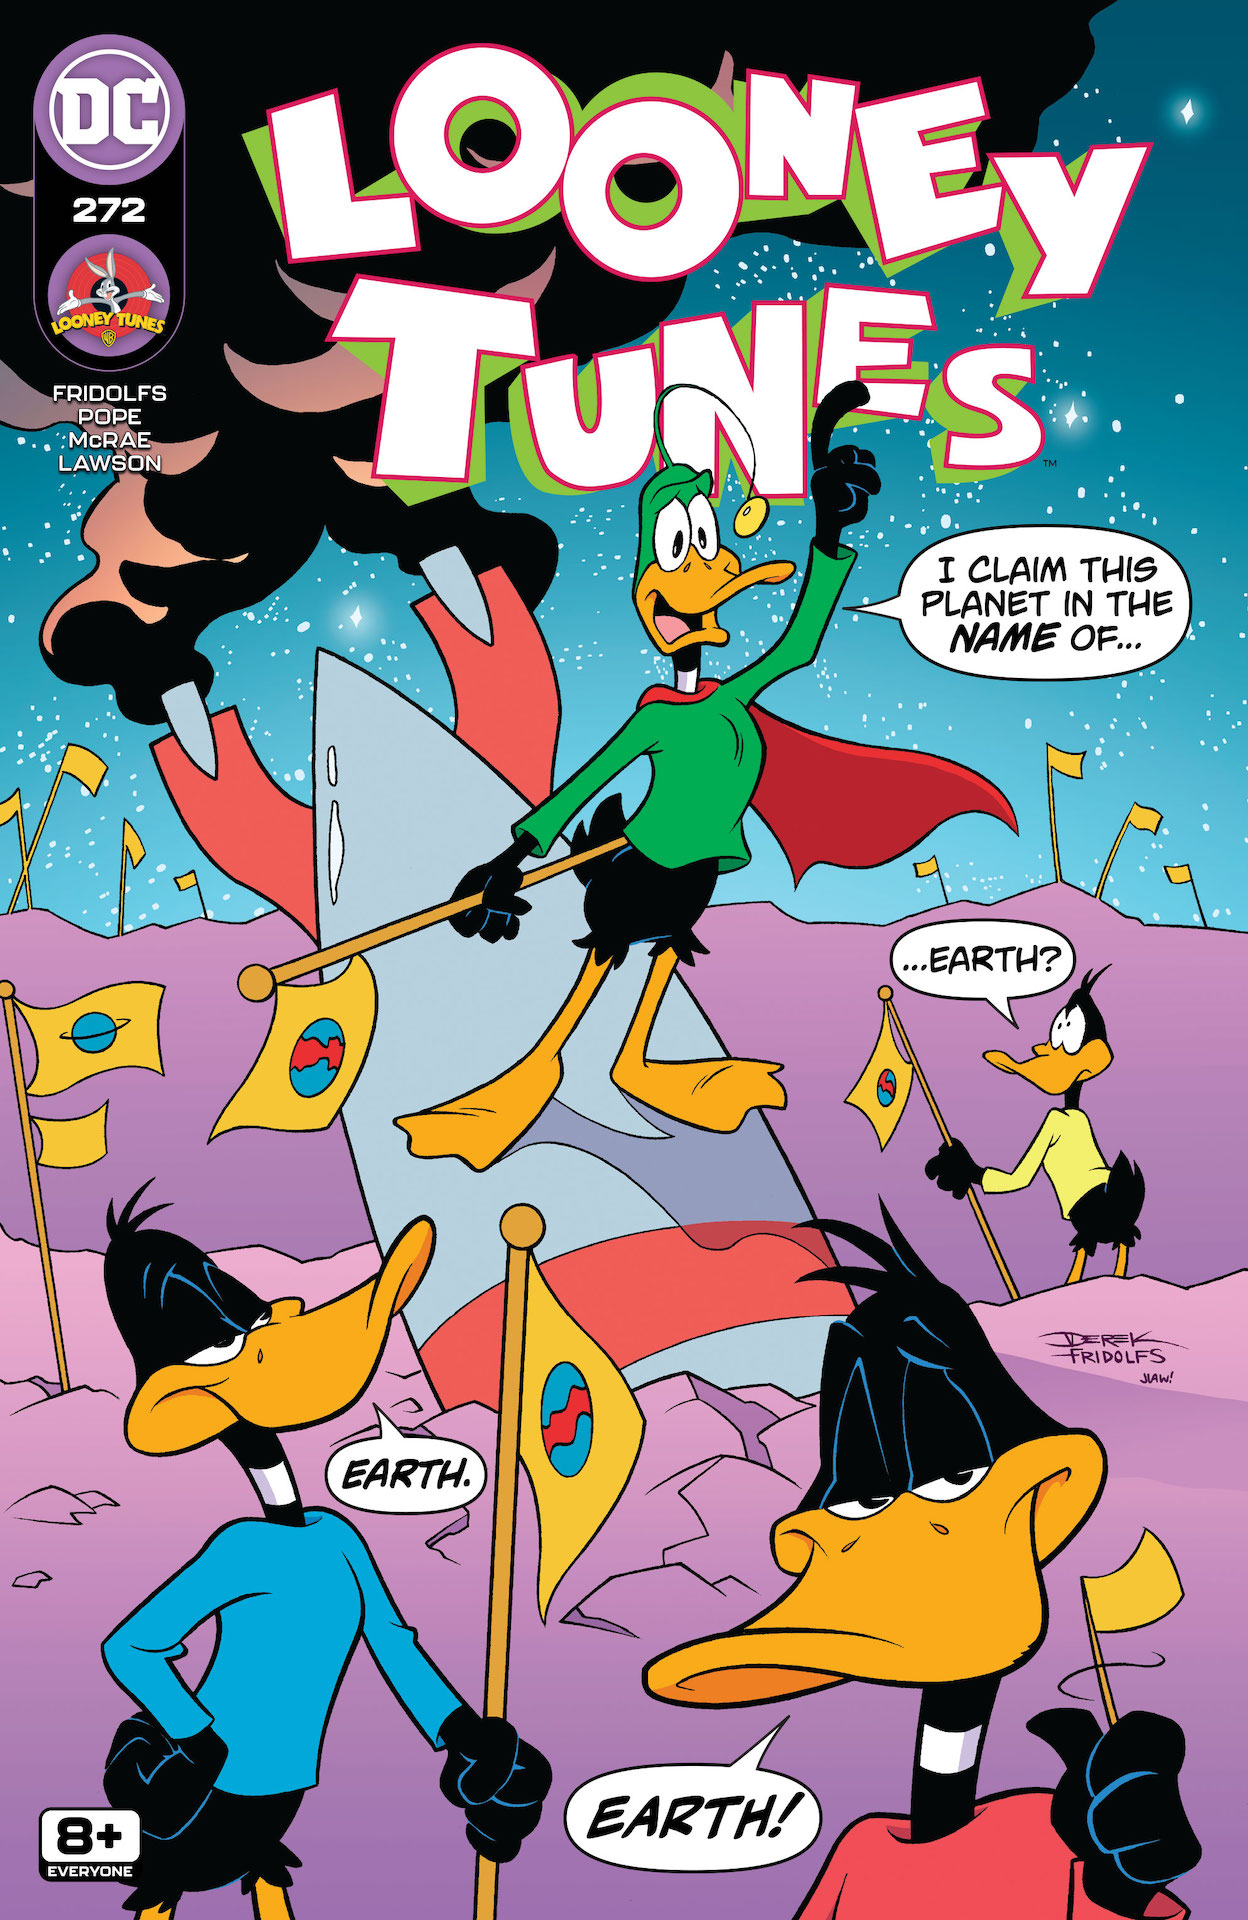 DC Preview: Looney Tunes #272